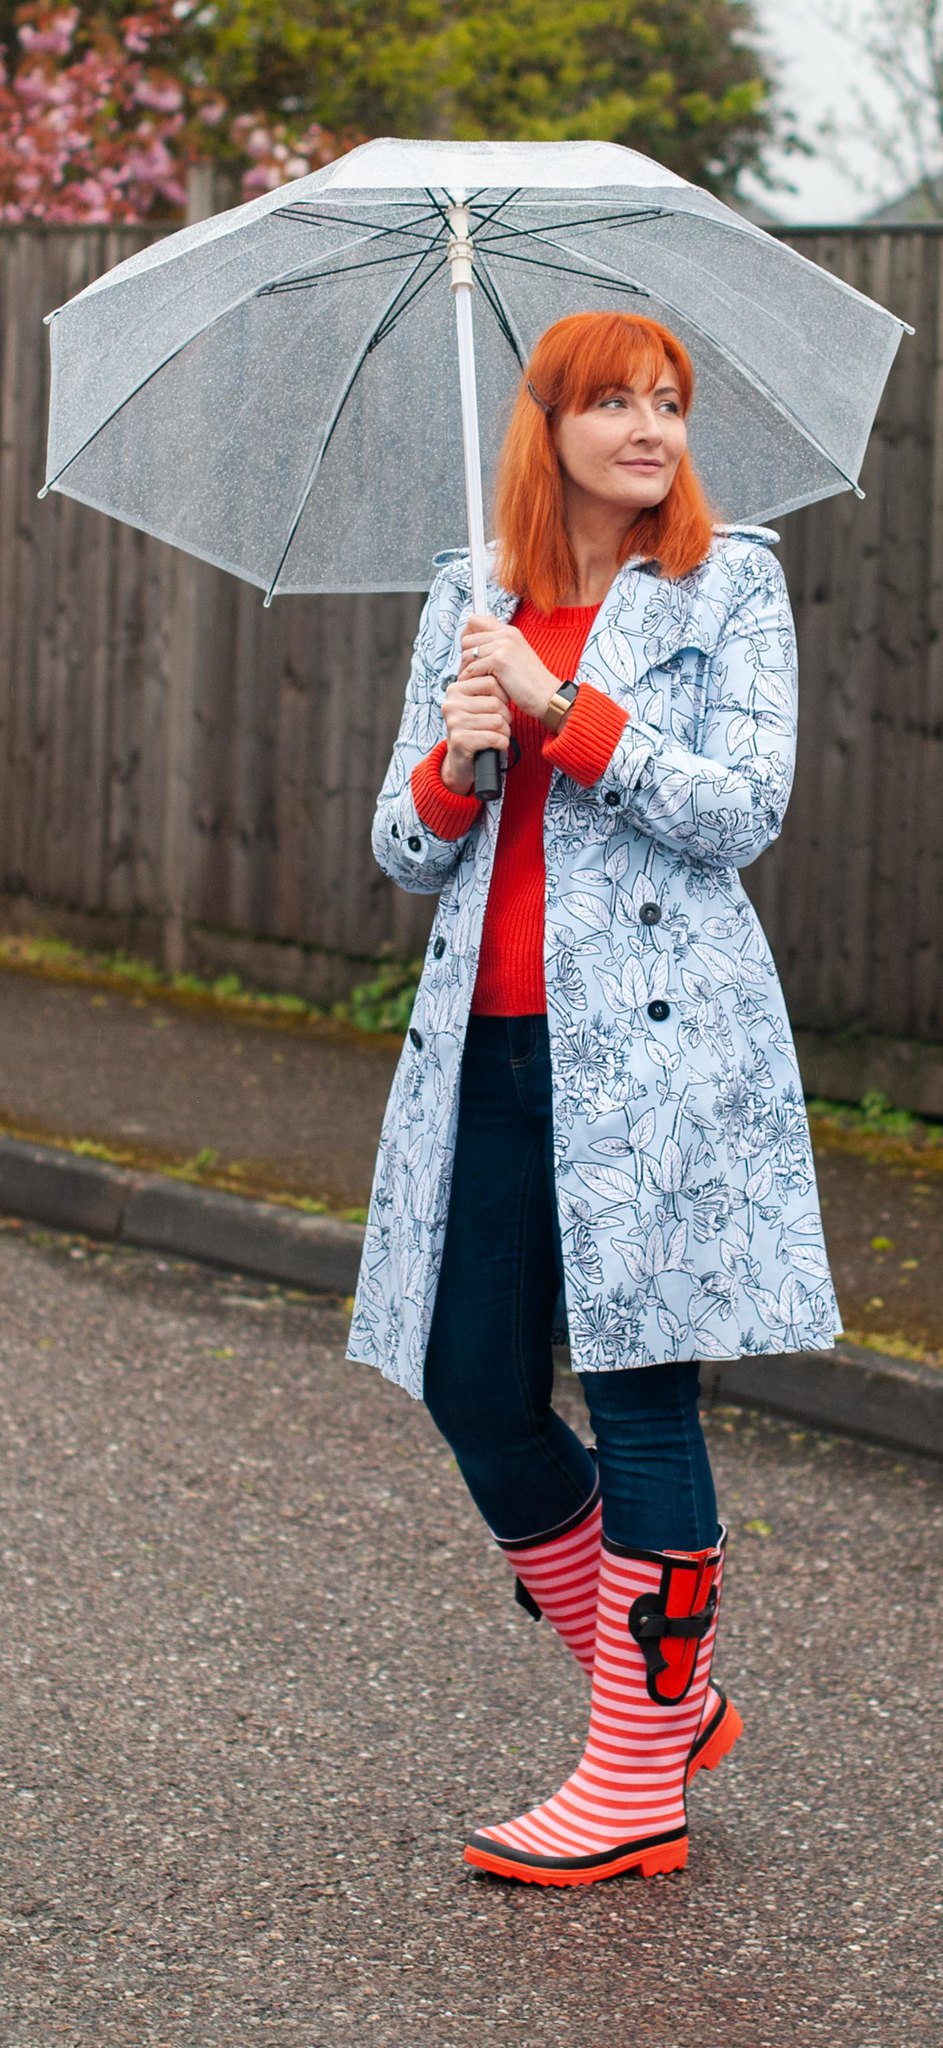 A Colourful Rainy Day Outfit With Wide Wellies - Spring Showers Outfit, Over 40 Fashion | Not Dressed As Lamb, over 40 fashion blog